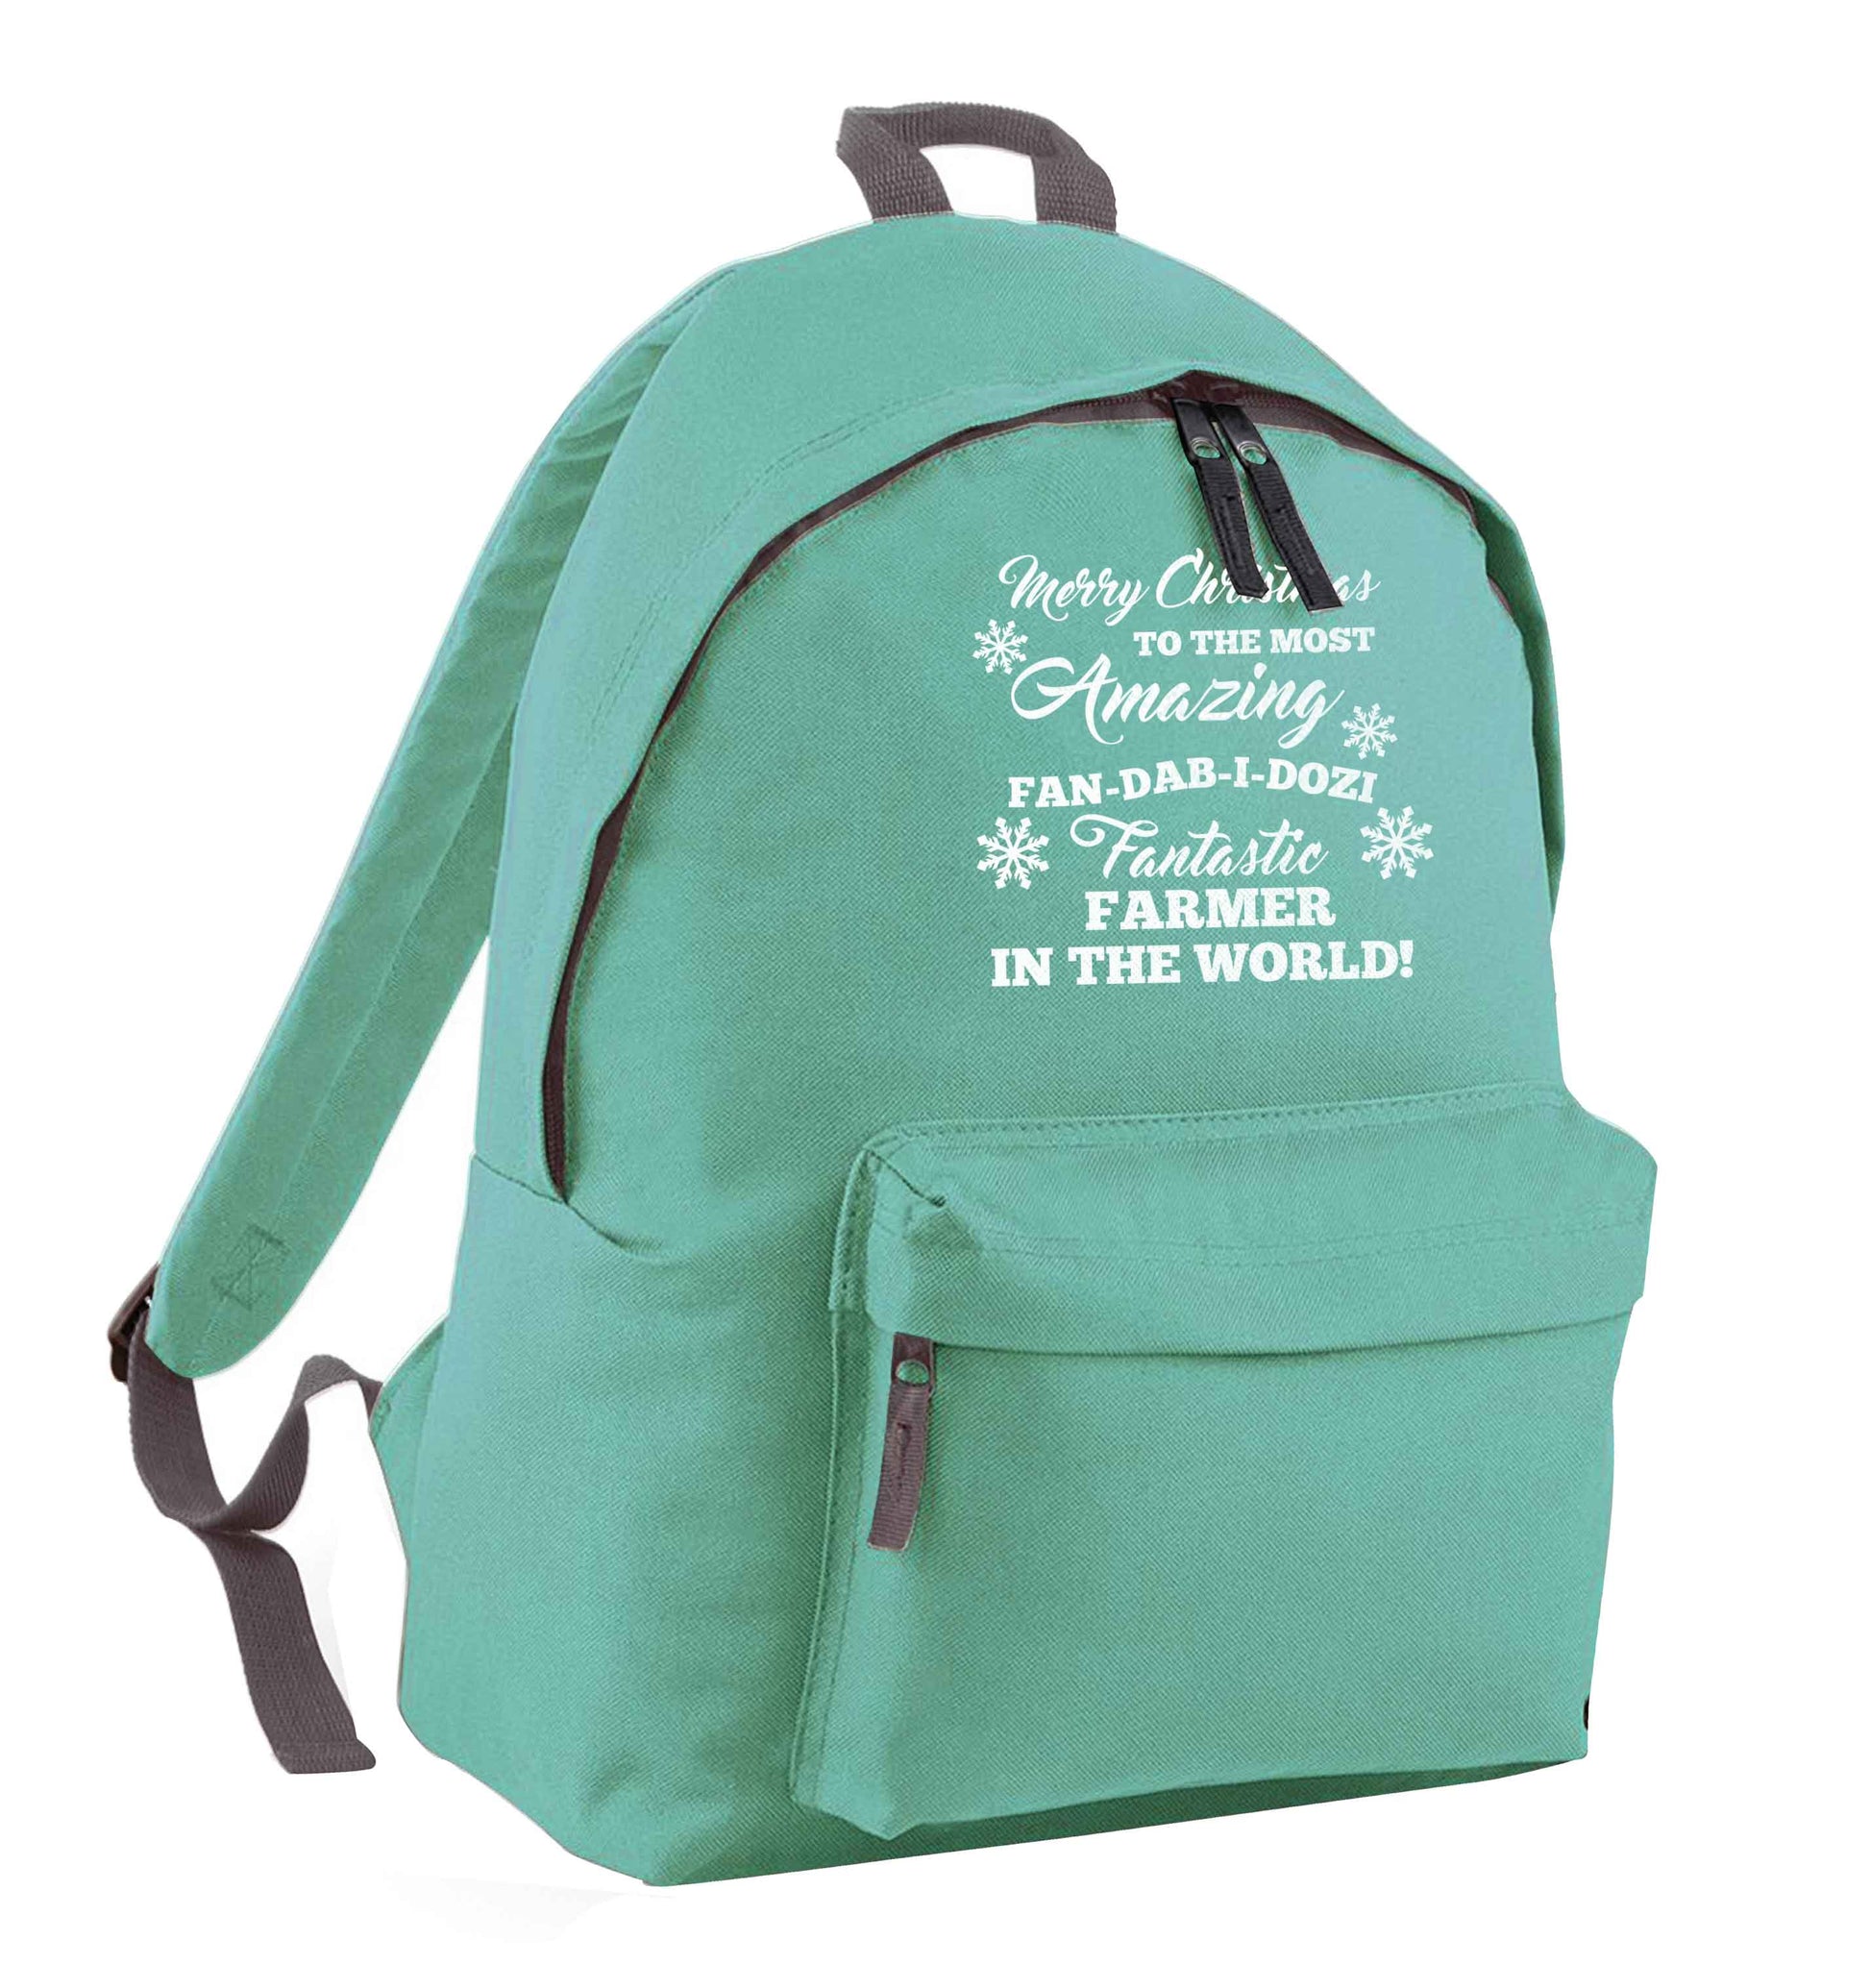 Merry Christmas to the most amazing farmer in the world! mint adults backpack